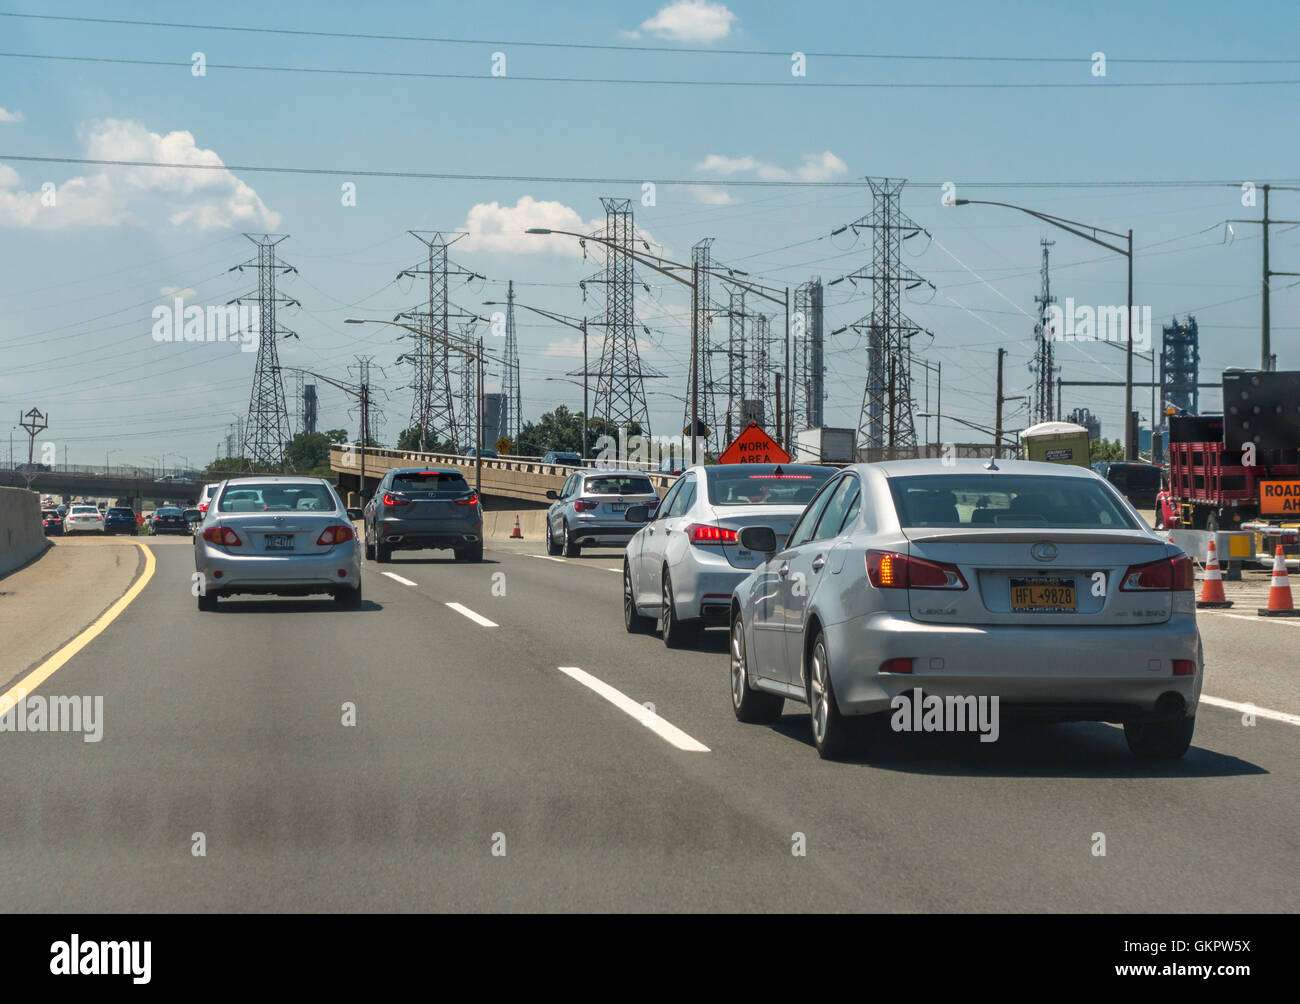 New Jersey Turnpike cars with electricity pylons and power lines along the road Stock Photo